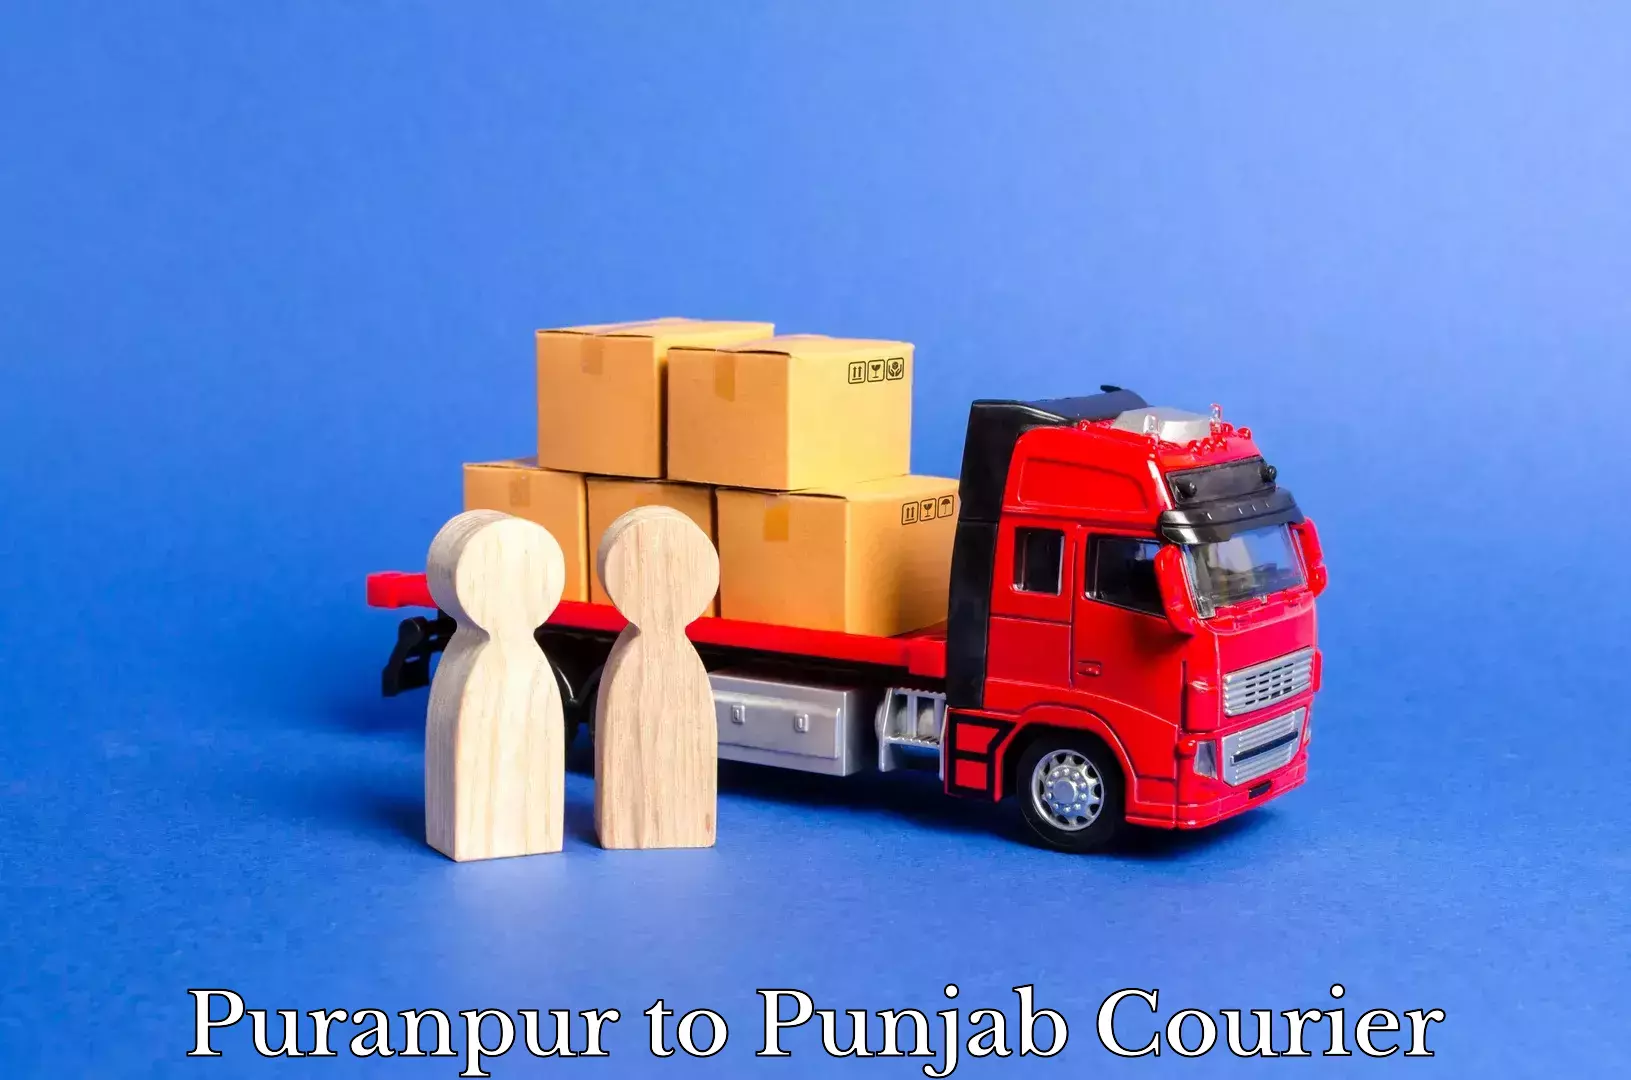 Modern delivery technologies Puranpur to Punjab